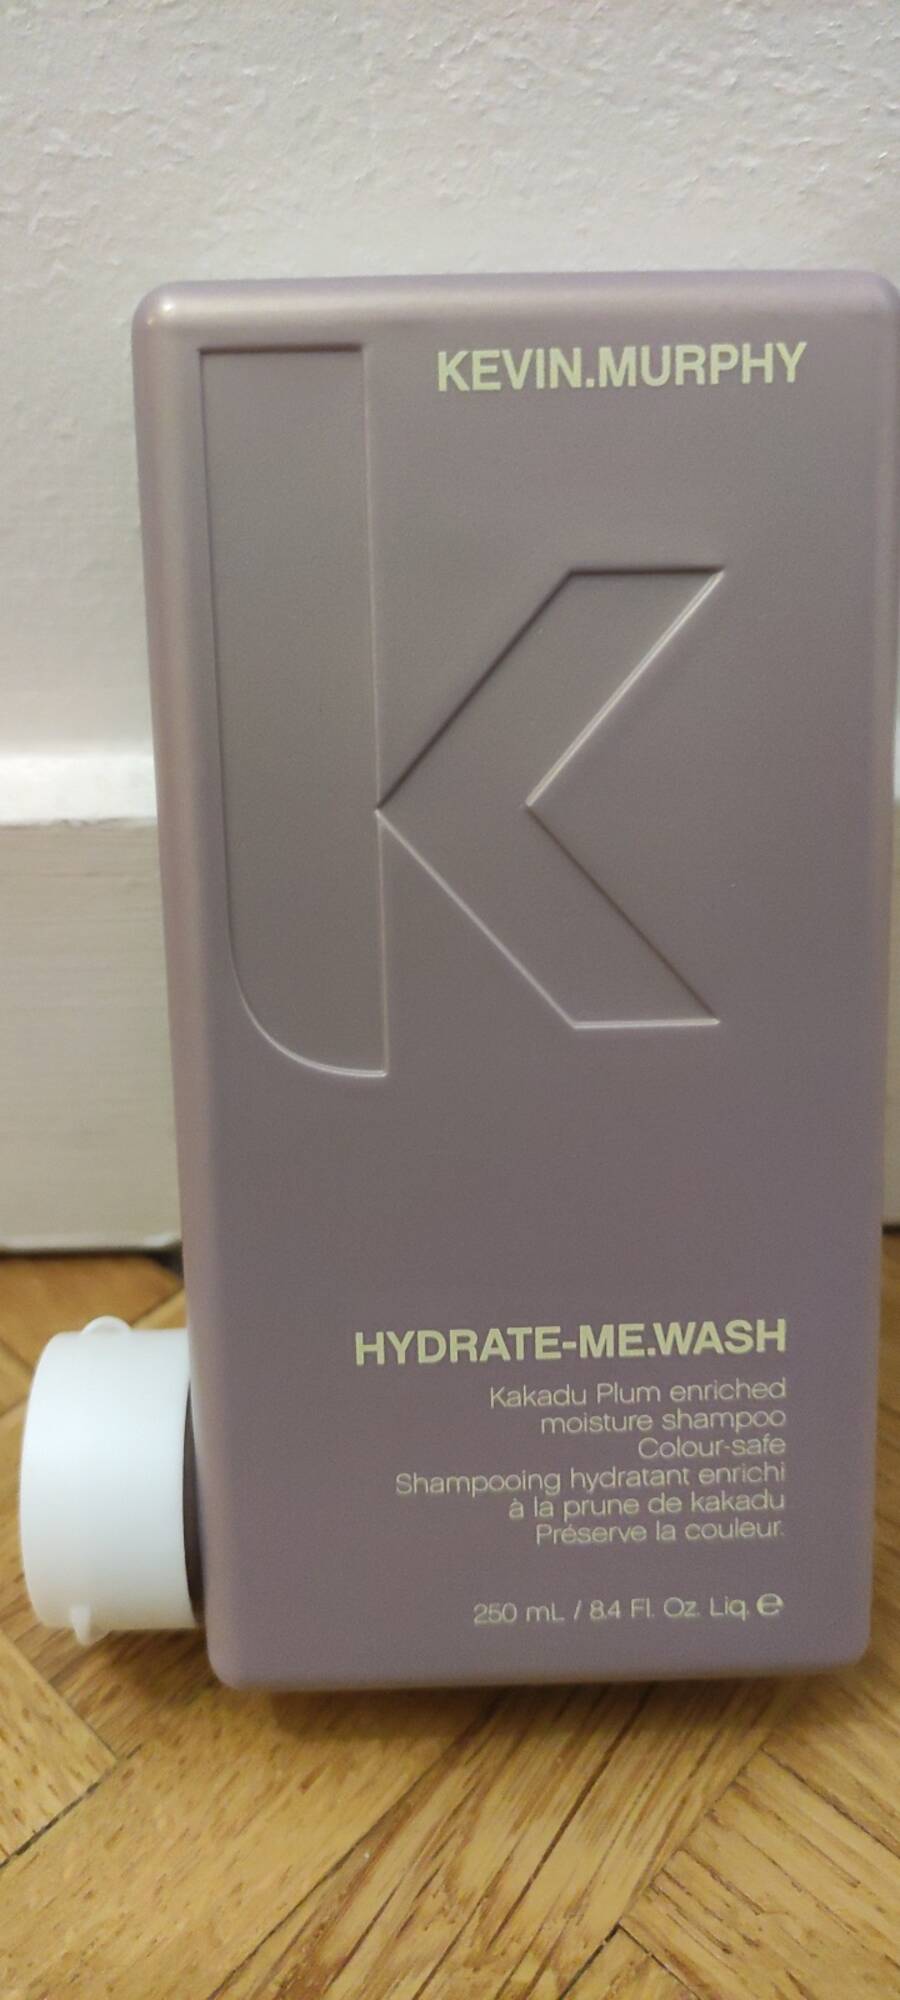 KEVIN MURPHY - Hydrate-me.wash - Shampooing hydratant